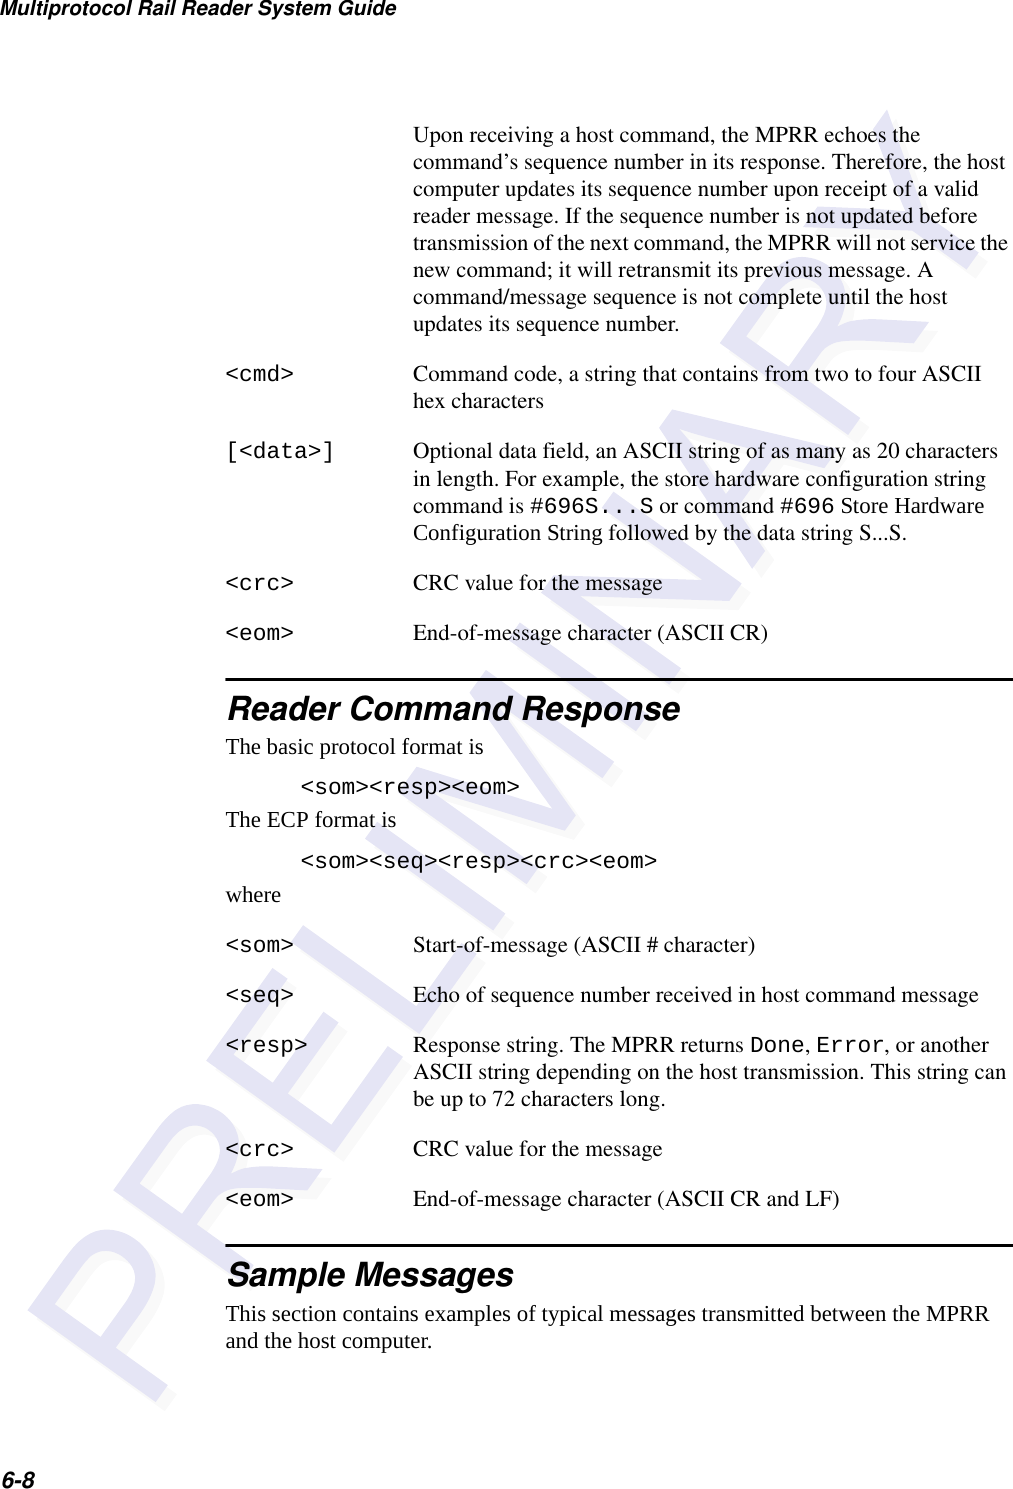 Multiprotocol Rail Reader System Guide6-8Upon receiving a host command, the MPRR echoes the command’s sequence number in its response. Therefore, the host computer updates its sequence number upon receipt of a valid reader message. If the sequence number is not updated before transmission of the next command, the MPRR will not service the new command; it will retransmit its previous message. A command/message sequence is not complete until the host updates its sequence number.&lt;cmd&gt; Command code, a string that contains from two to four ASCII hex characters[&lt;data&gt;] Optional data field, an ASCII string of as many as 20 characters in length. For example, the store hardware configuration string command is #696S...S or command #696 Store Hardware Configuration String followed by the data string S...S.&lt;crc&gt; CRC value for the message&lt;eom&gt; End-of-message character (ASCII CR)Reader Command ResponseThe basic protocol format is&lt;som&gt;&lt;resp&gt;&lt;eom&gt;The ECP format is&lt;som&gt;&lt;seq&gt;&lt;resp&gt;&lt;crc&gt;&lt;eom&gt;where&lt;som&gt; Start-of-message (ASCII # character)&lt;seq&gt; Echo of sequence number received in host command message&lt;resp&gt; Response string. The MPRR returns Done, Error, or another ASCII string depending on the host transmission. This string can be up to 72 characters long.&lt;crc&gt; CRC value for the message&lt;eom&gt; End-of-message character (ASCII CR and LF)Sample MessagesThis section contains examples of typical messages transmitted between the MPRR and the host computer.